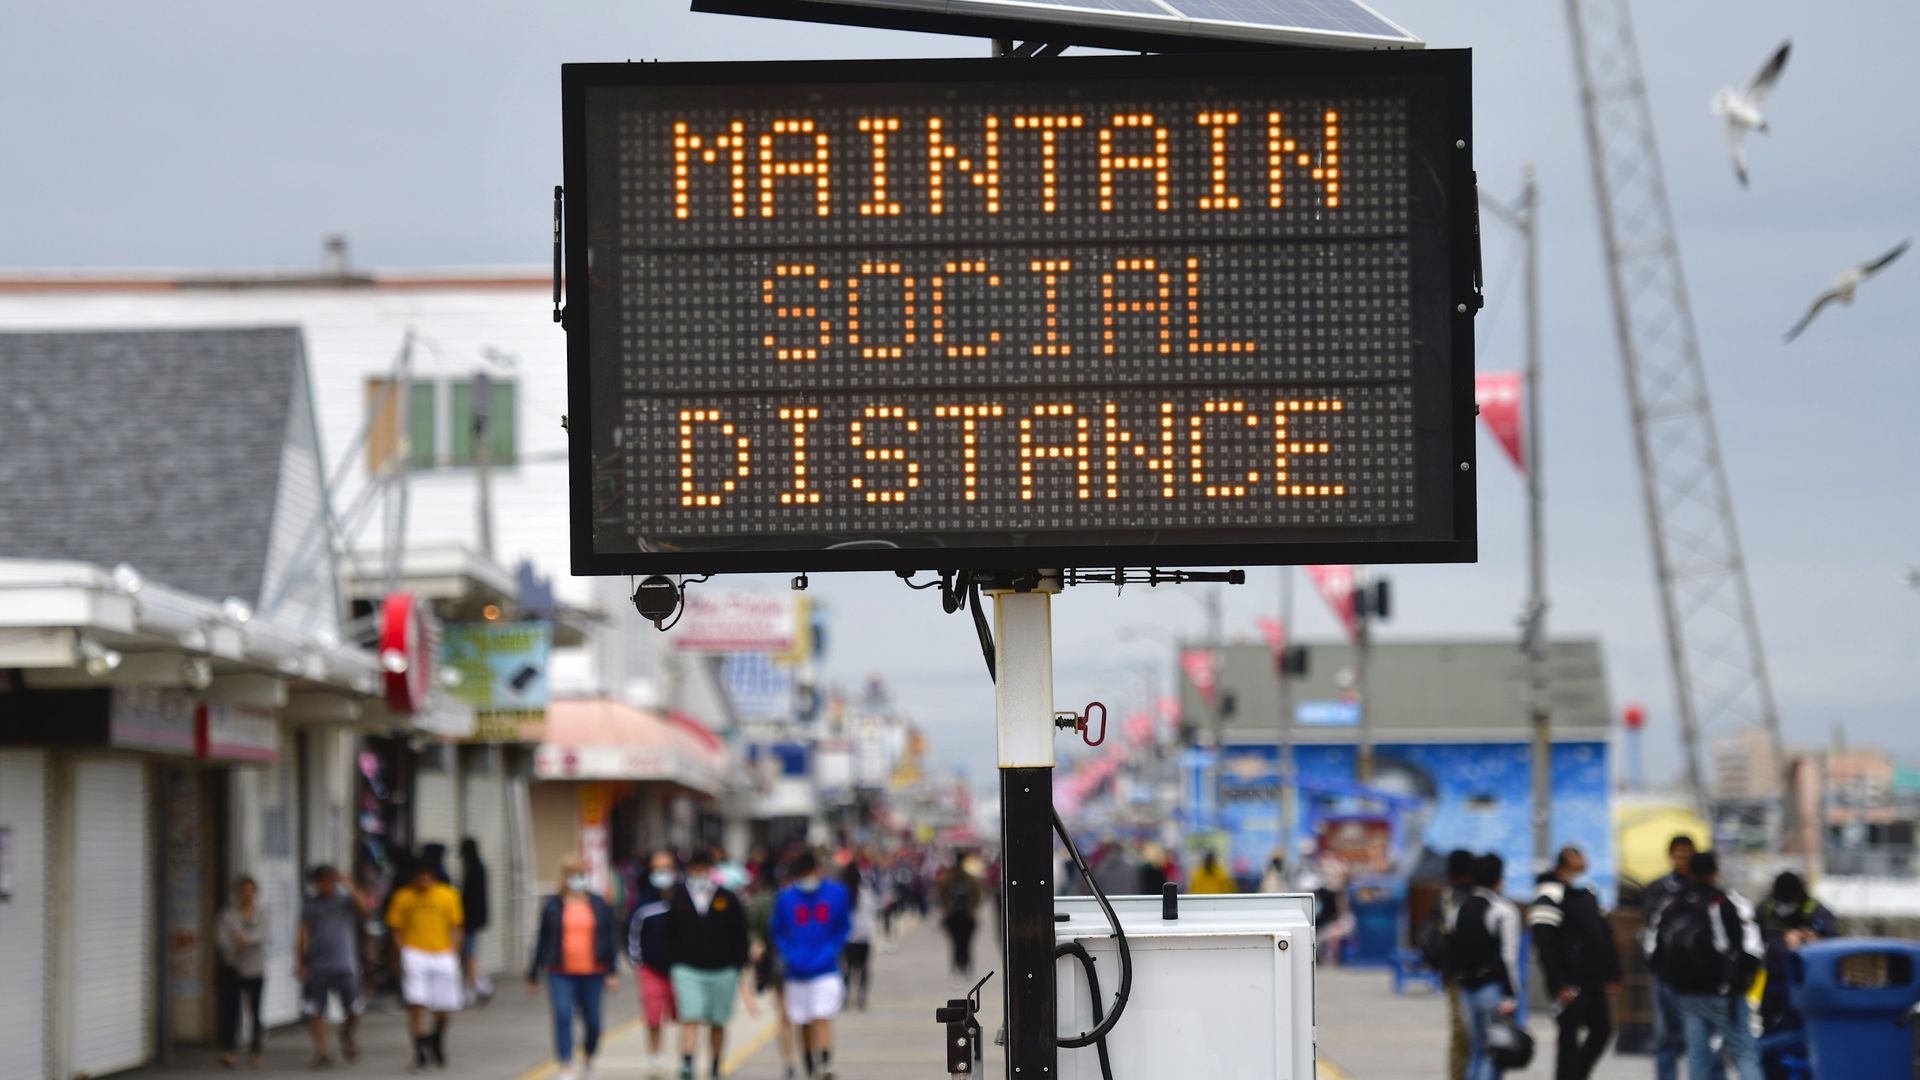 A sign placed on the boardwalk states "MAINTAIN SOCIAL DISTANCE" on May 24, 2020 in Wildwood, New Jersey.